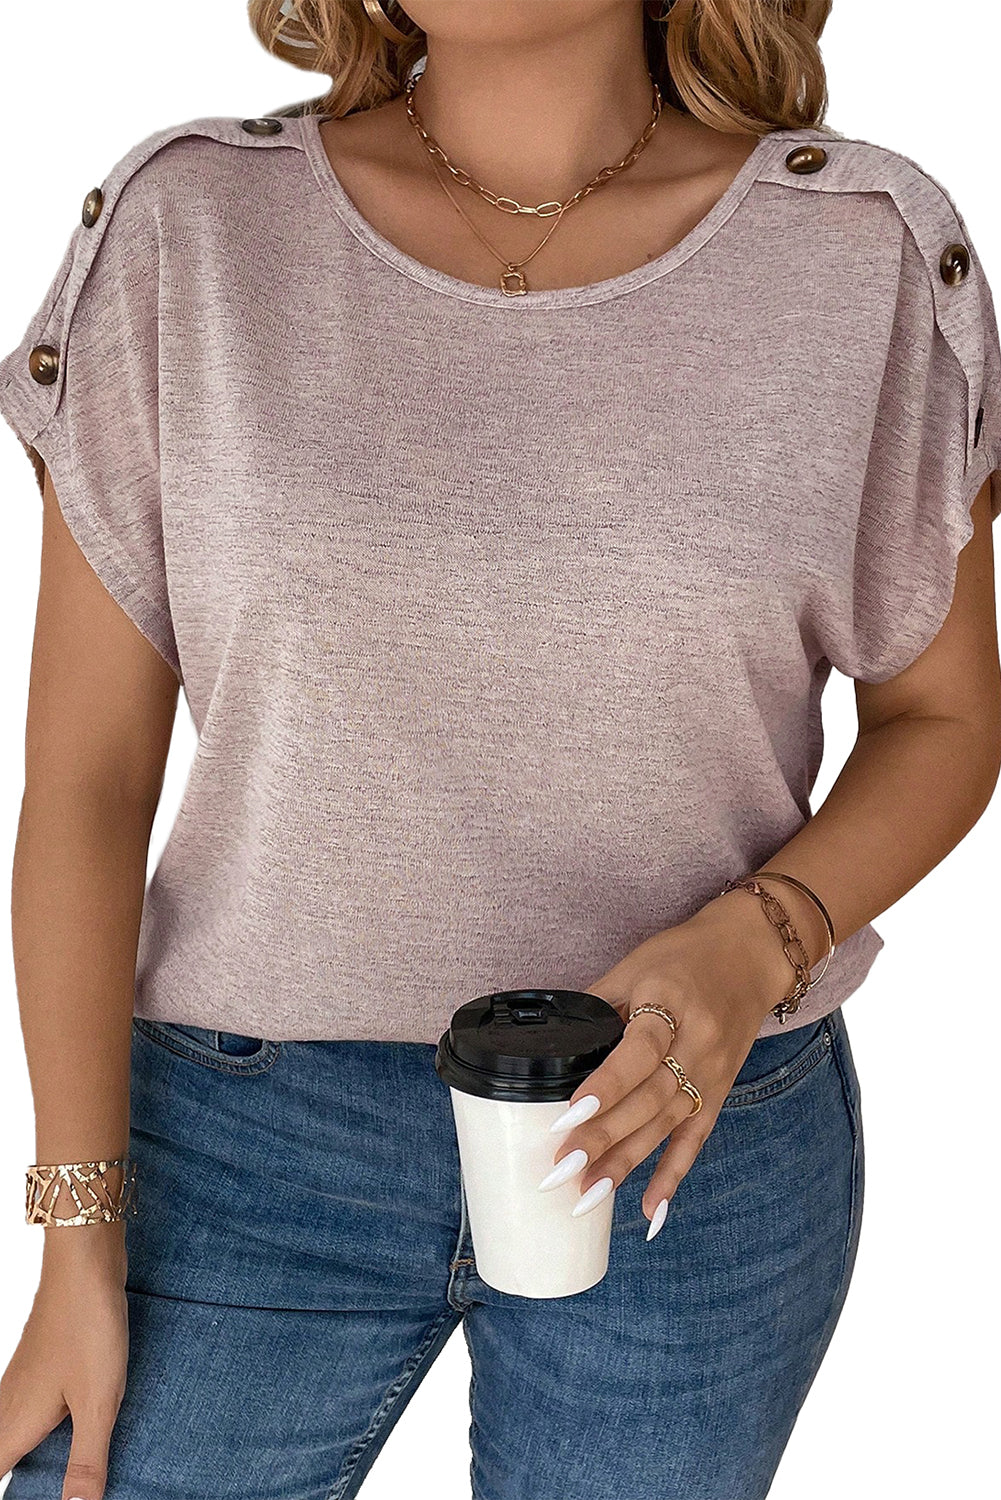 Delicacy Plus Size Button Detail Batwing Sleeve Tee-ECB